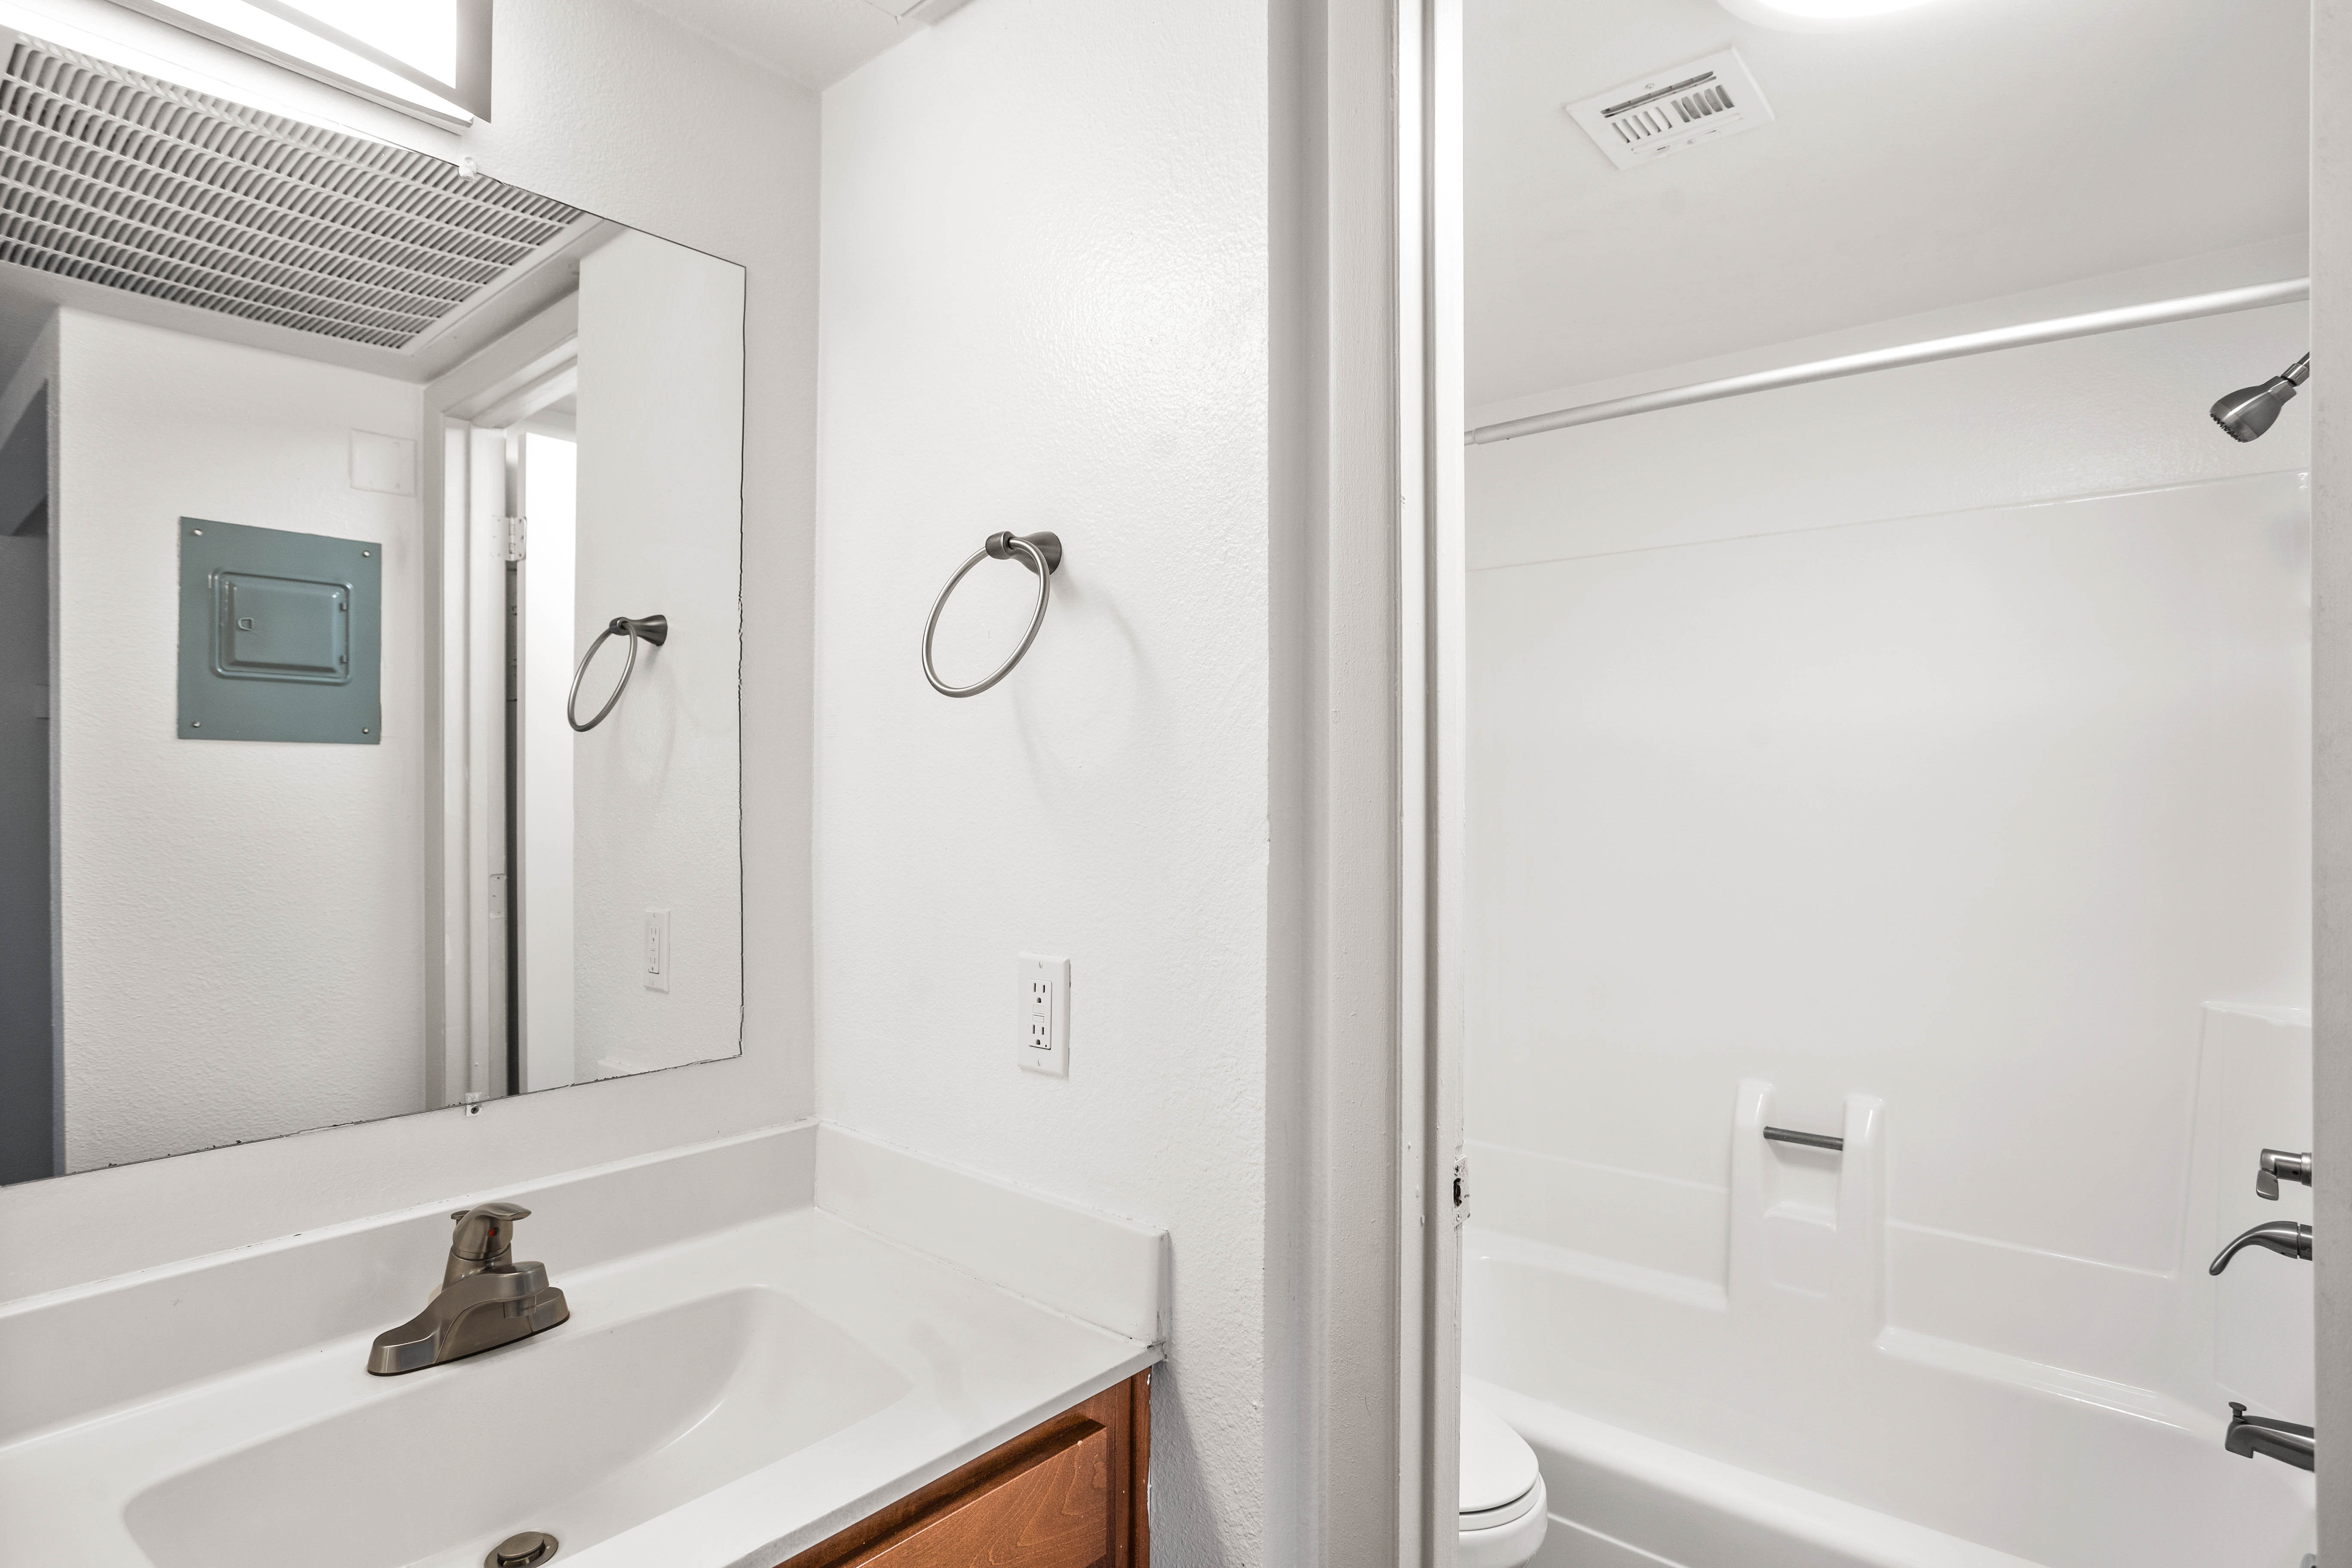 Clean bathroom with cherry wood cabinets, a large mirror, and separate toilet and shower room